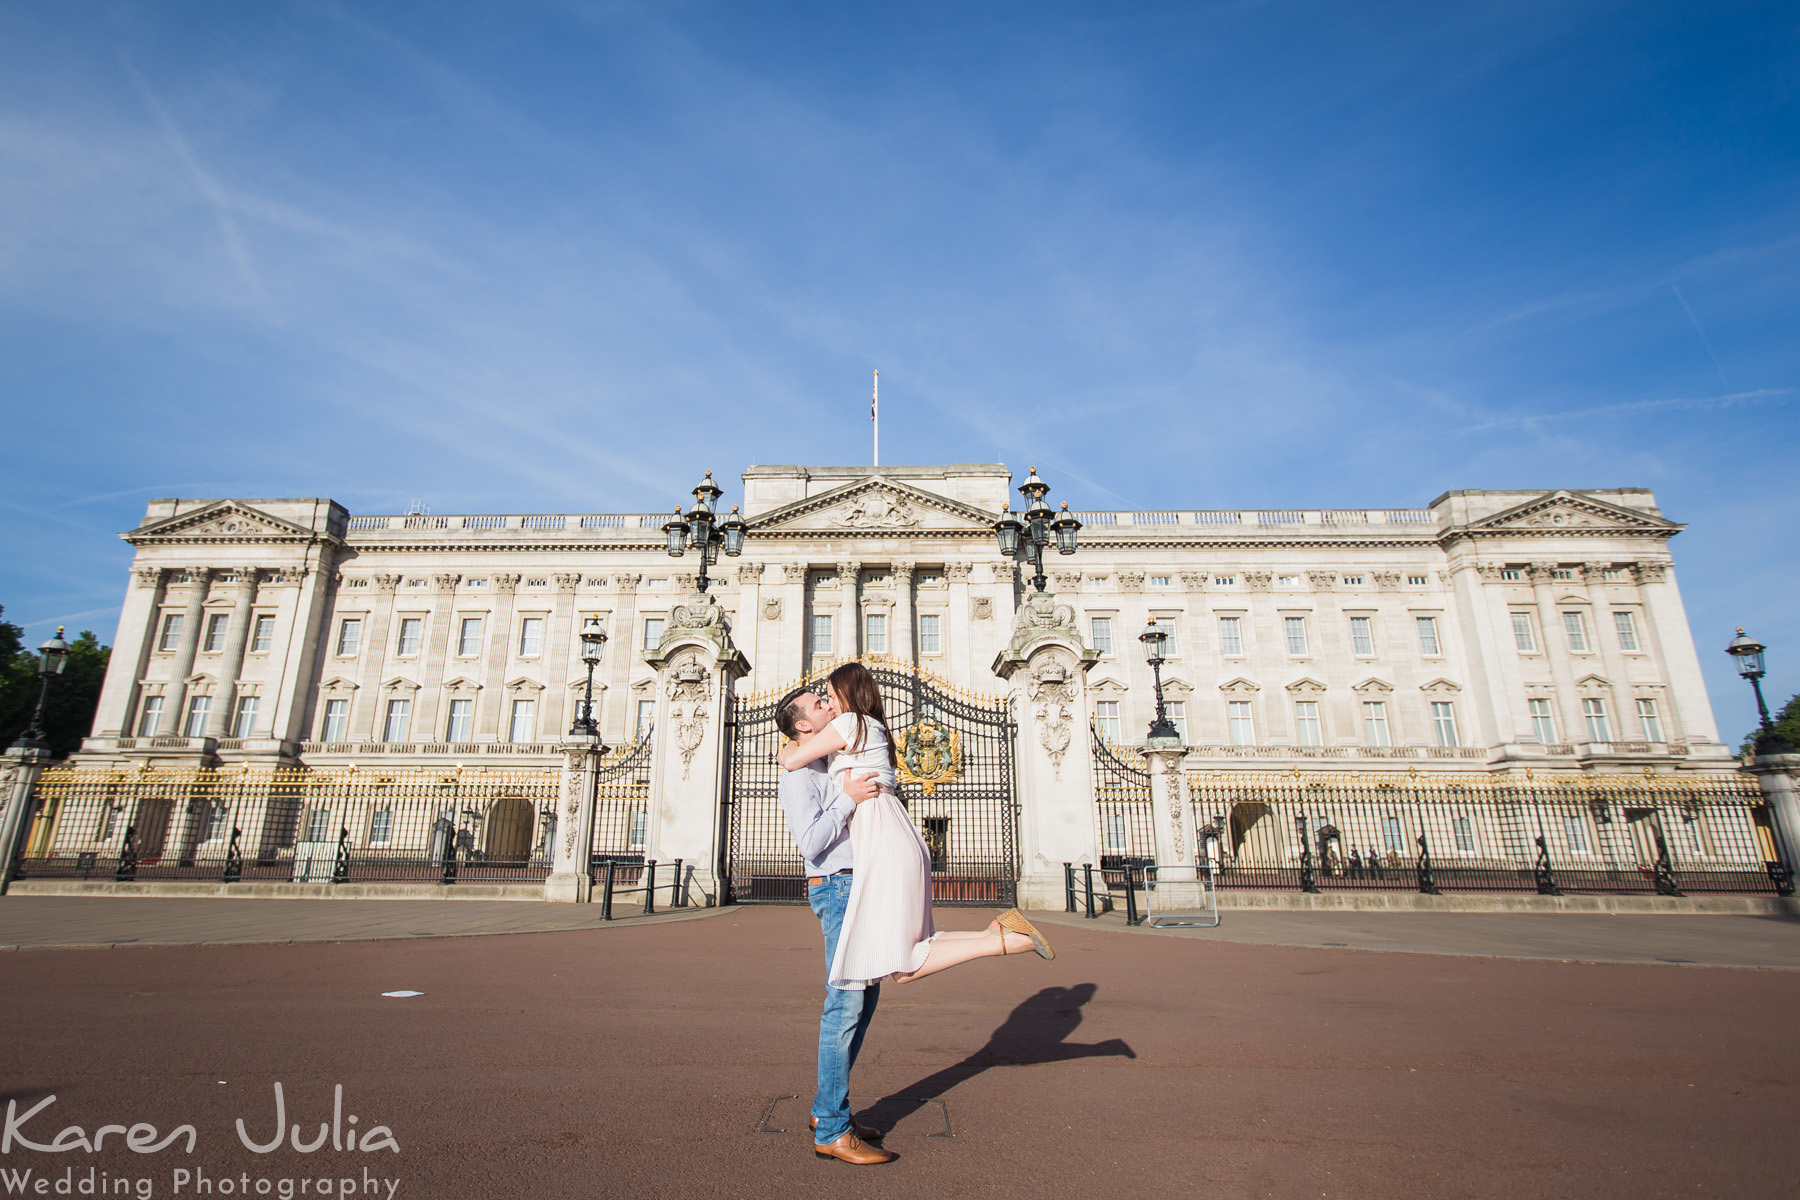 couple embrace during engagement portrait shoot in front of Buckingham Palance